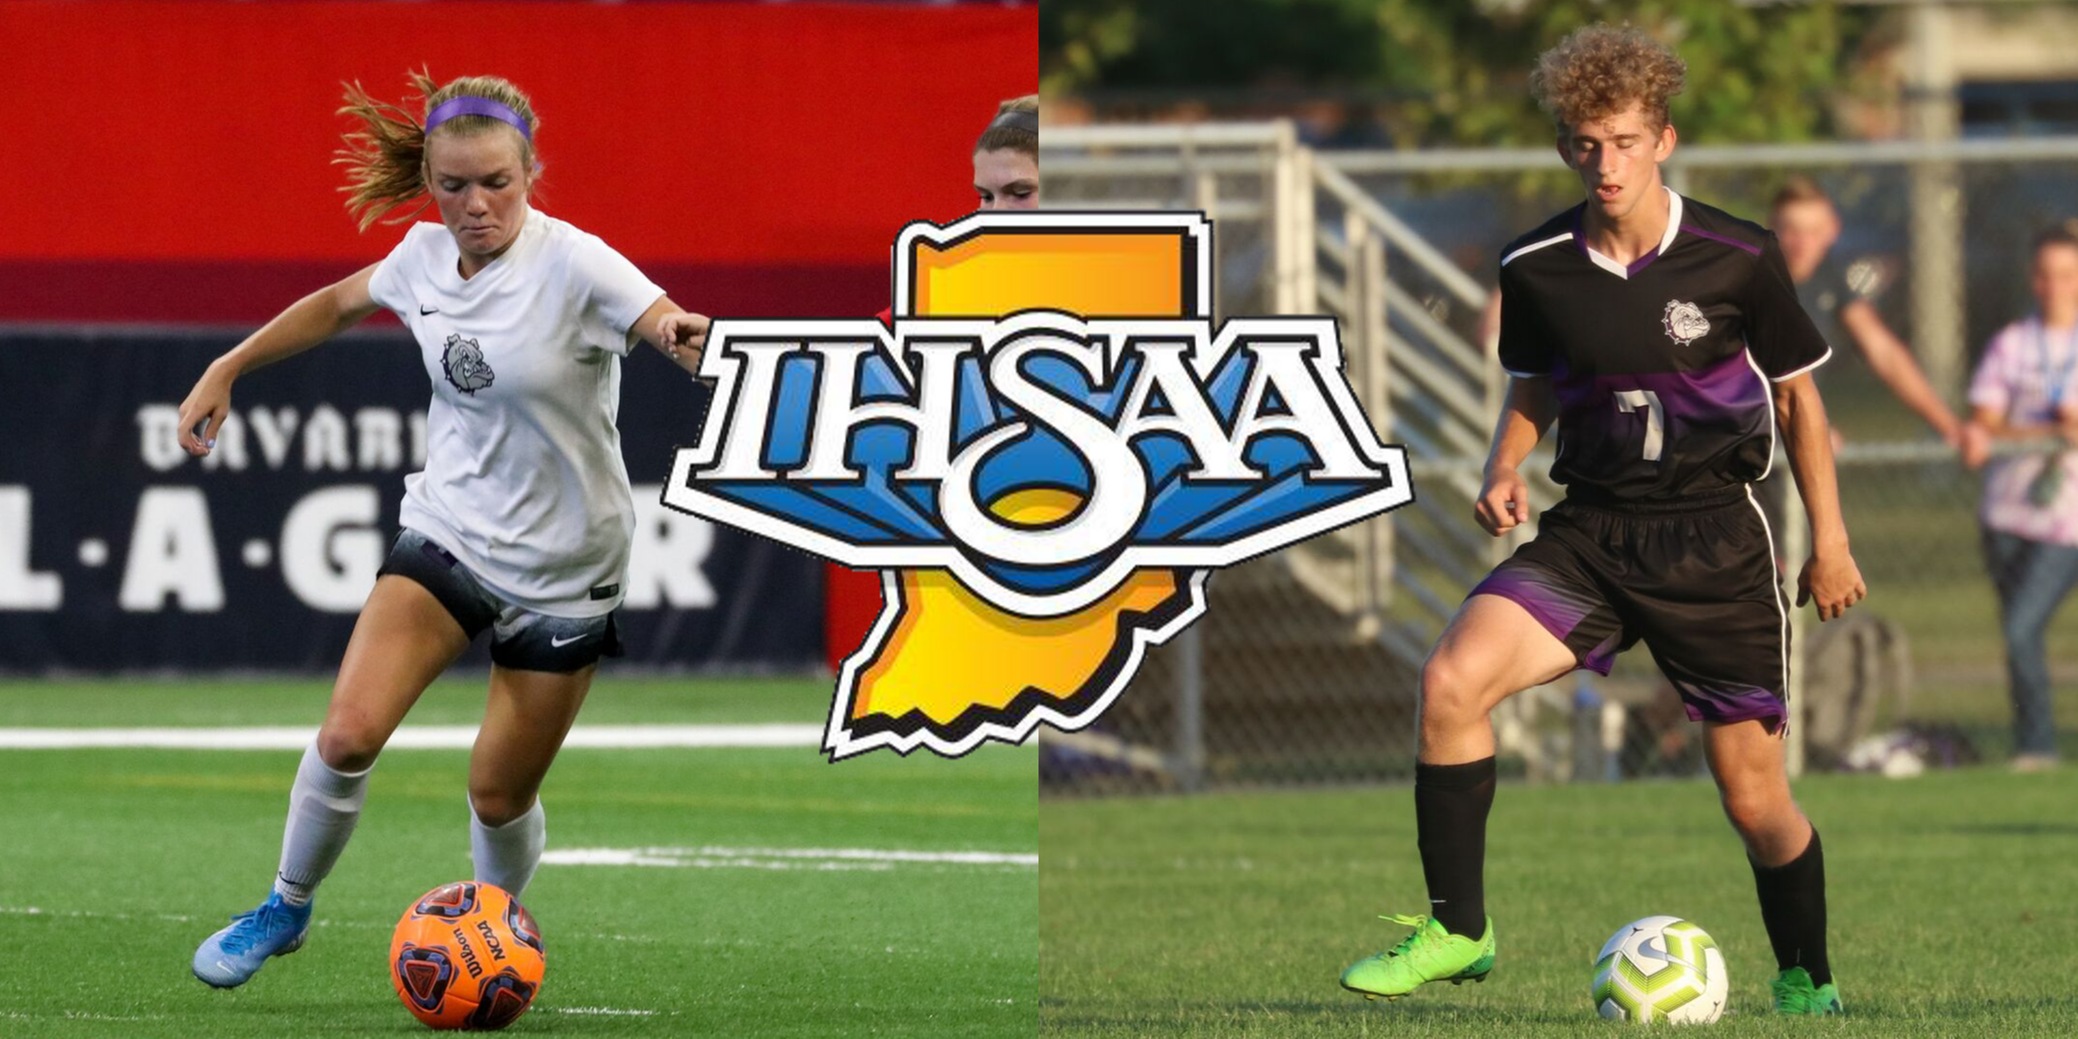 IHSAA releases 2019 Boys and Girls Soccer State Tournament Pairings